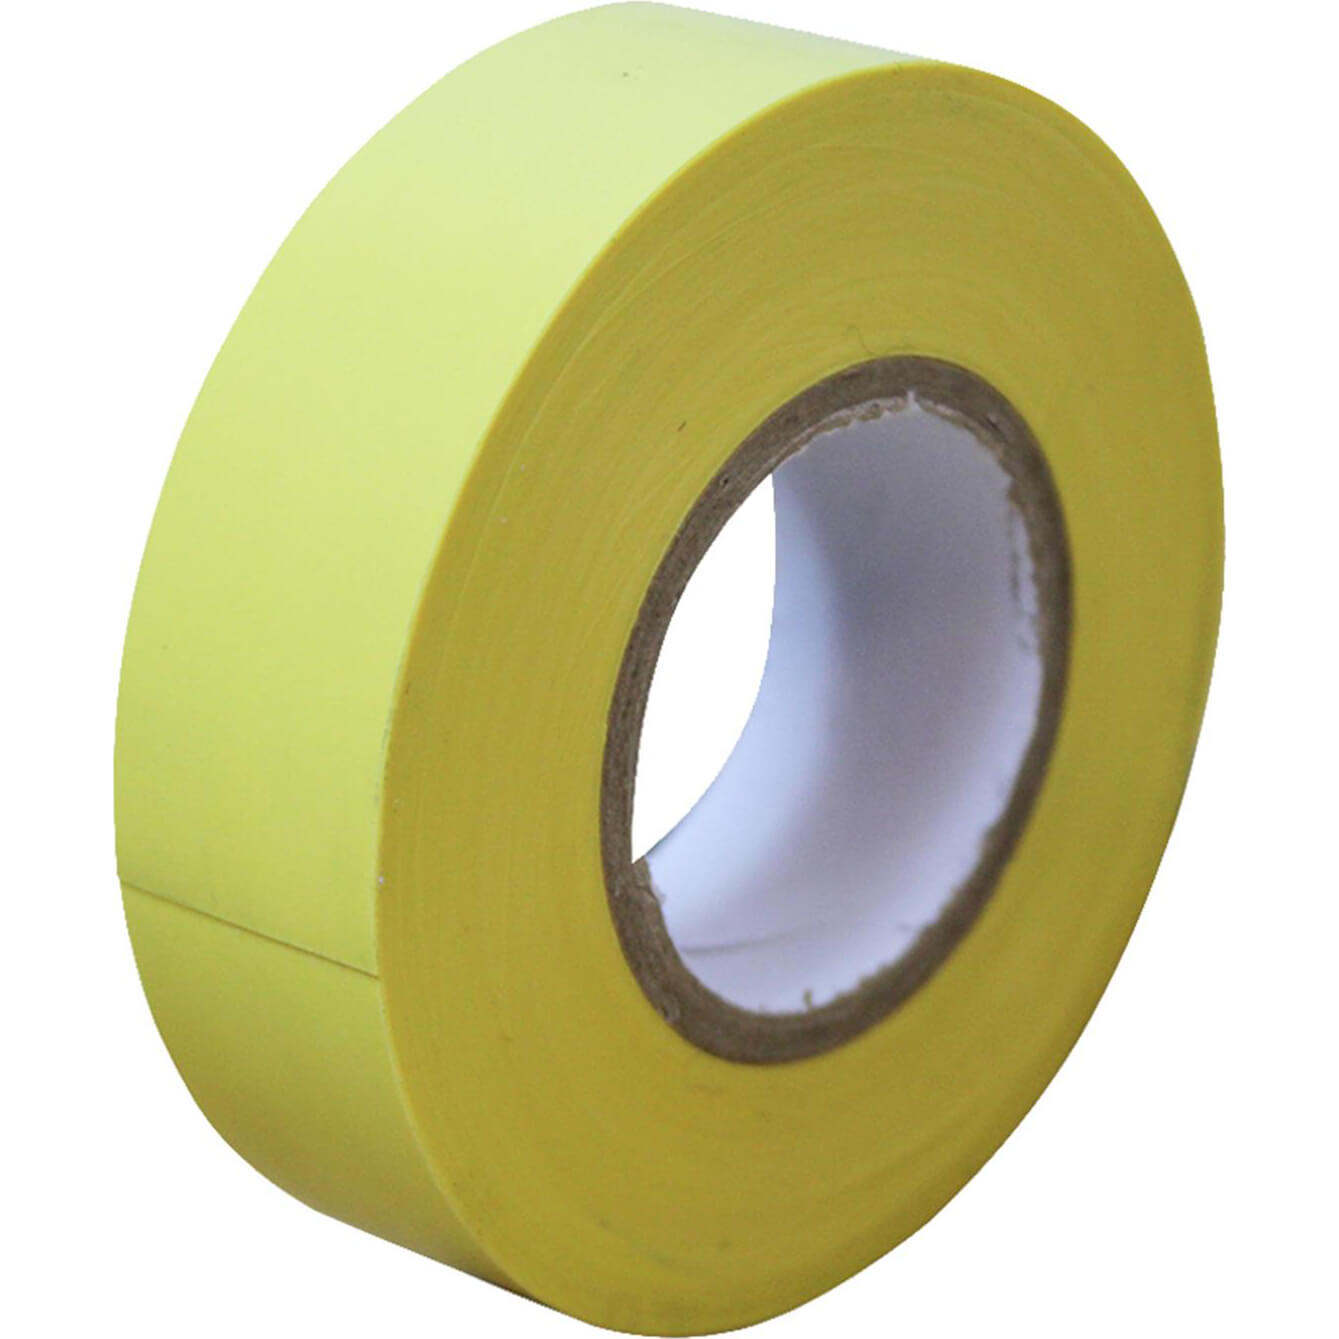 Insulation Tape Yellow 50mm Wide x 33m Roll